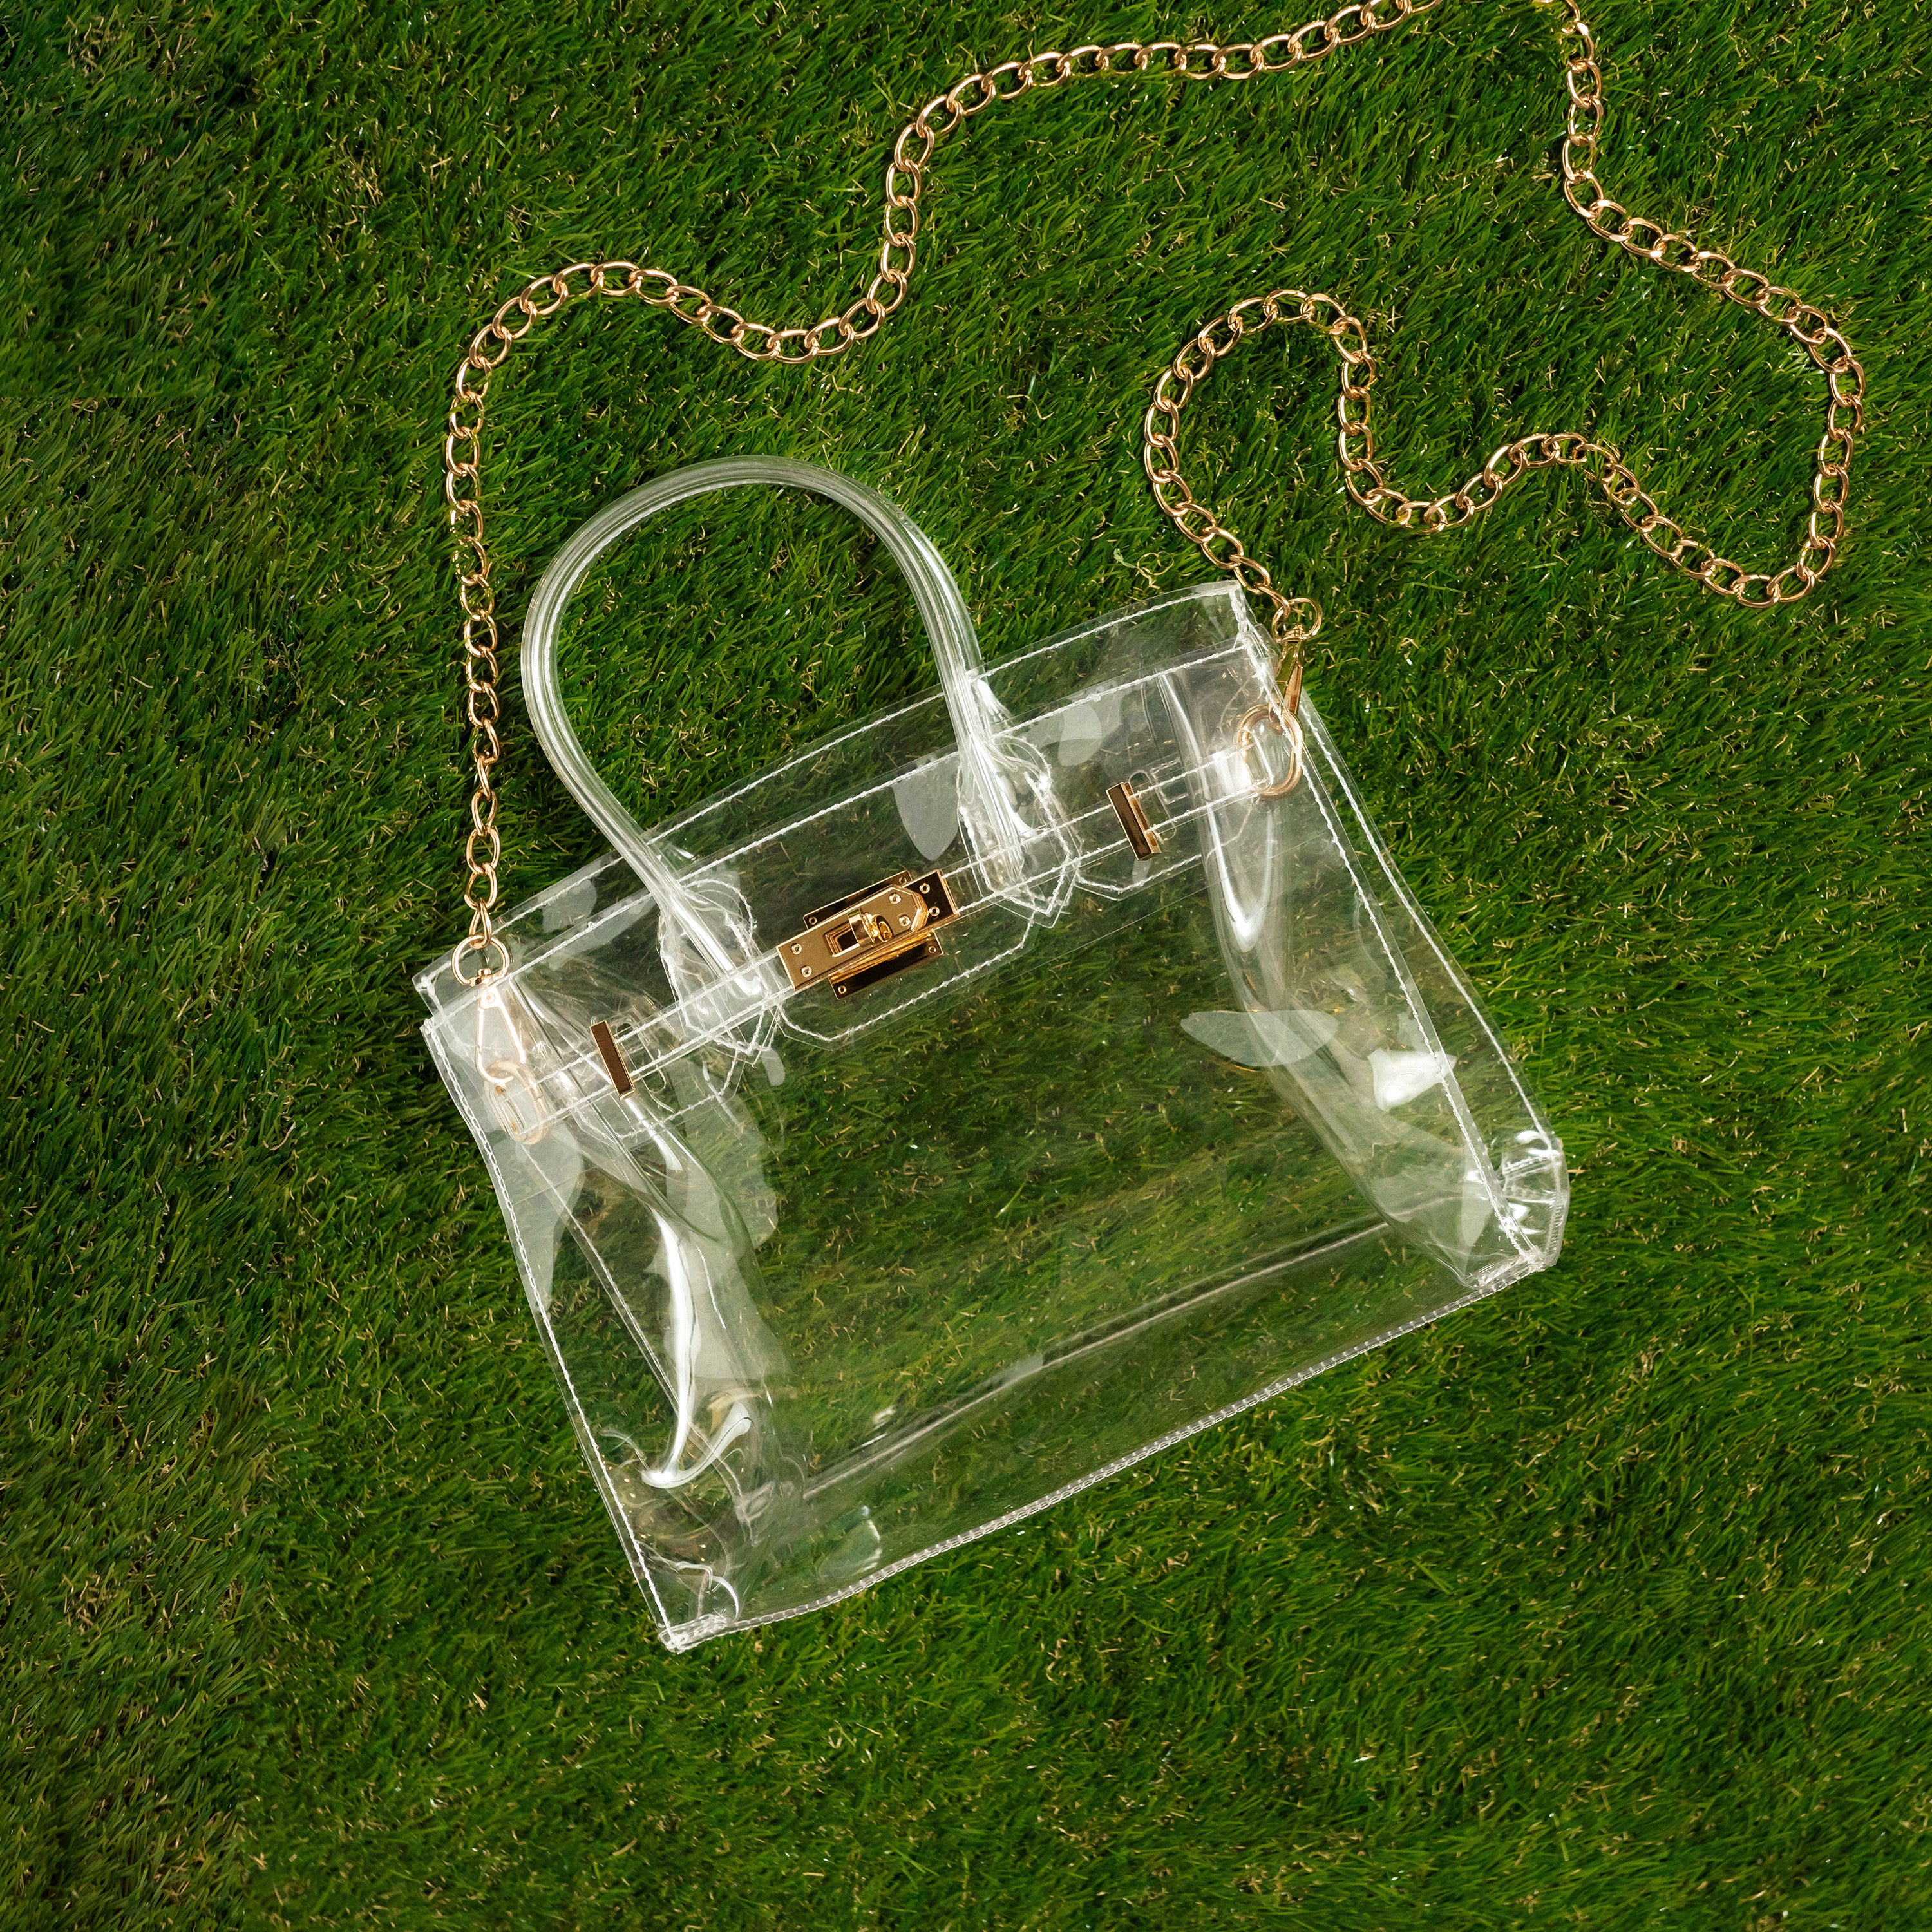 Skyler Blue’s Large Clear Satchel stadium approved clear bag / clear purse.